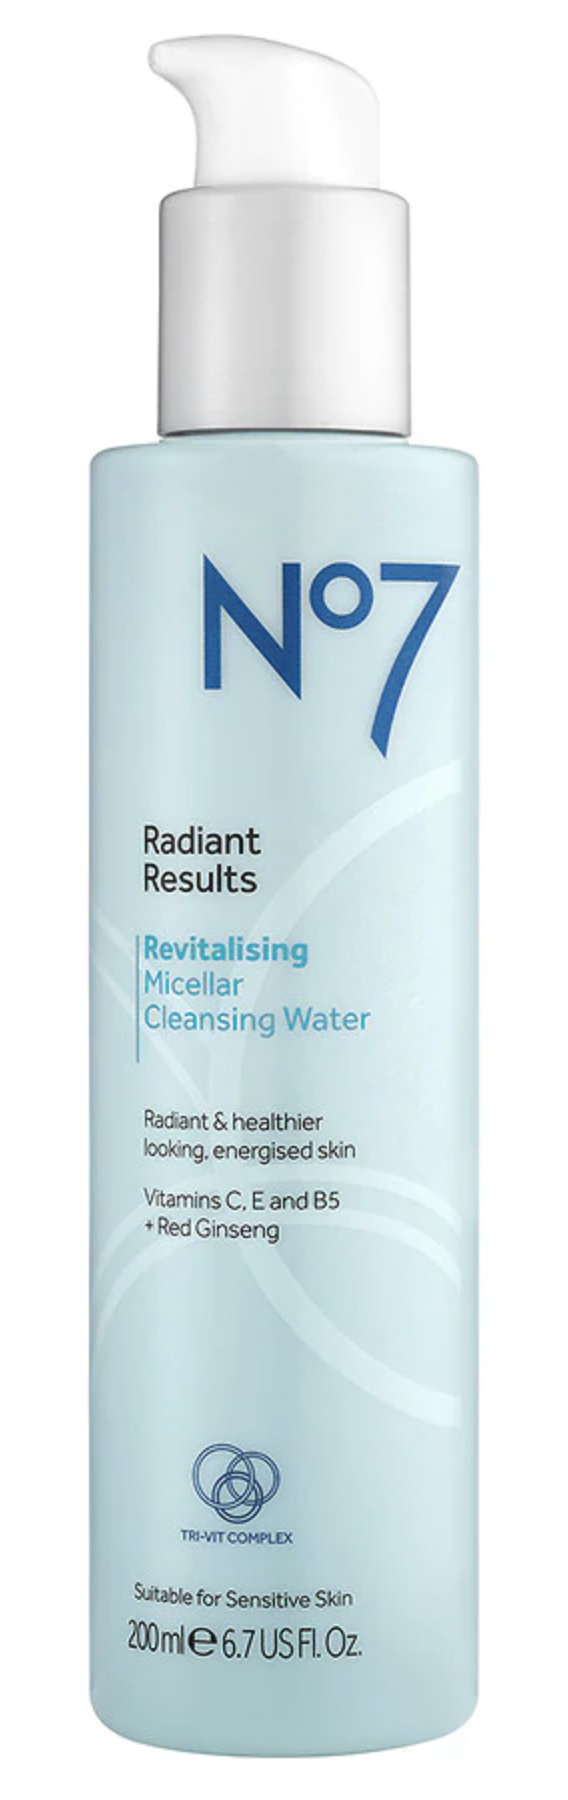 No7 Radiant Results Revitalizing Micellar Cleansing Water